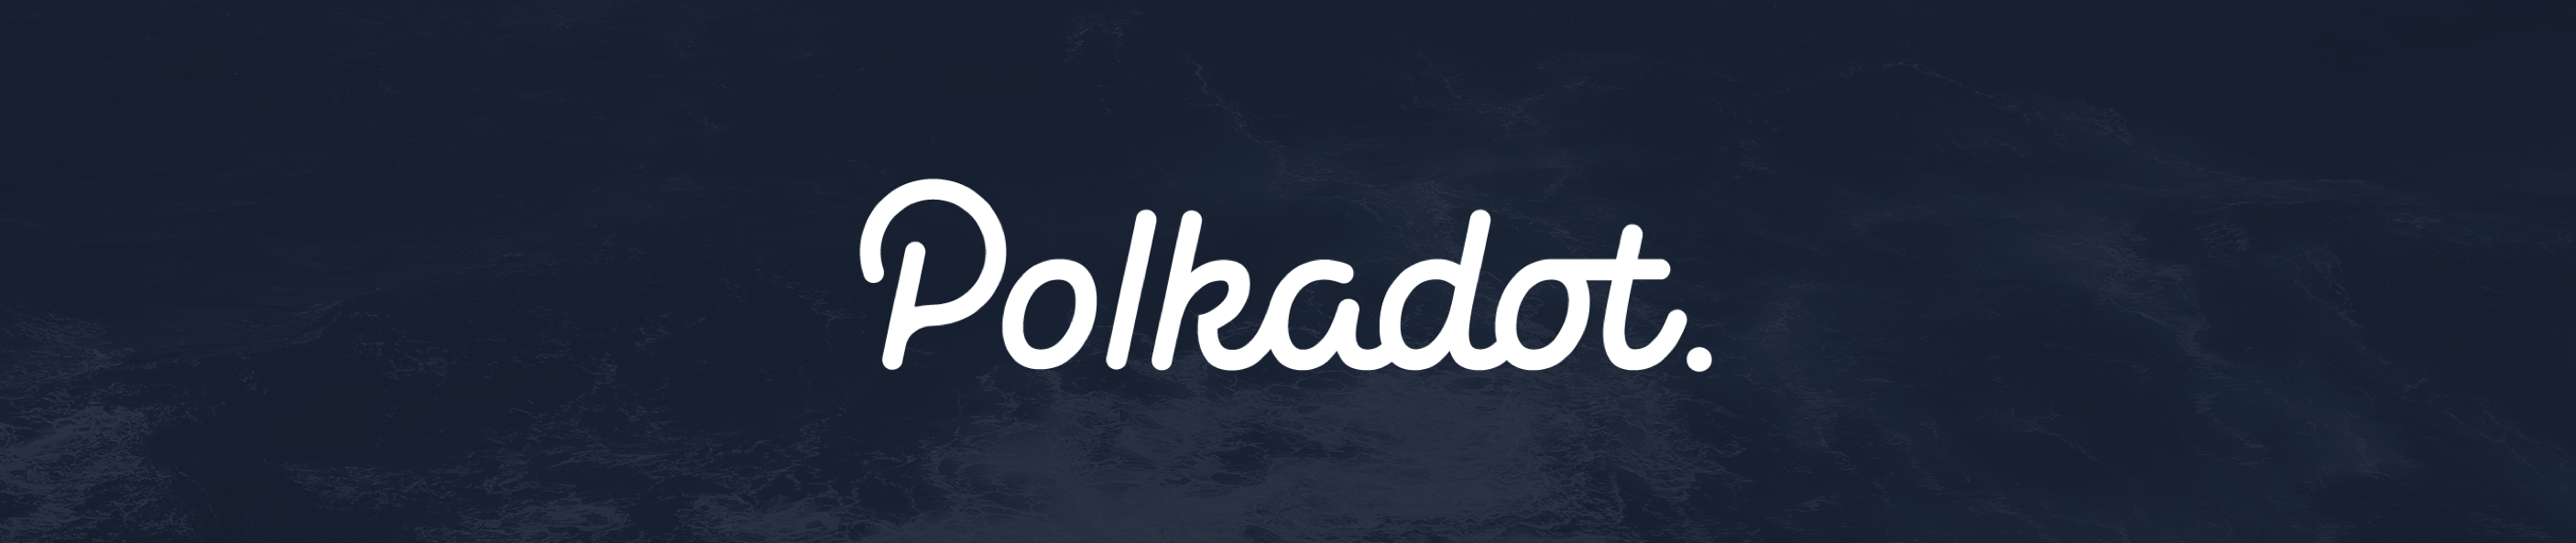 Polkadot empowers blockchain networks to work together under the protection of shared security.